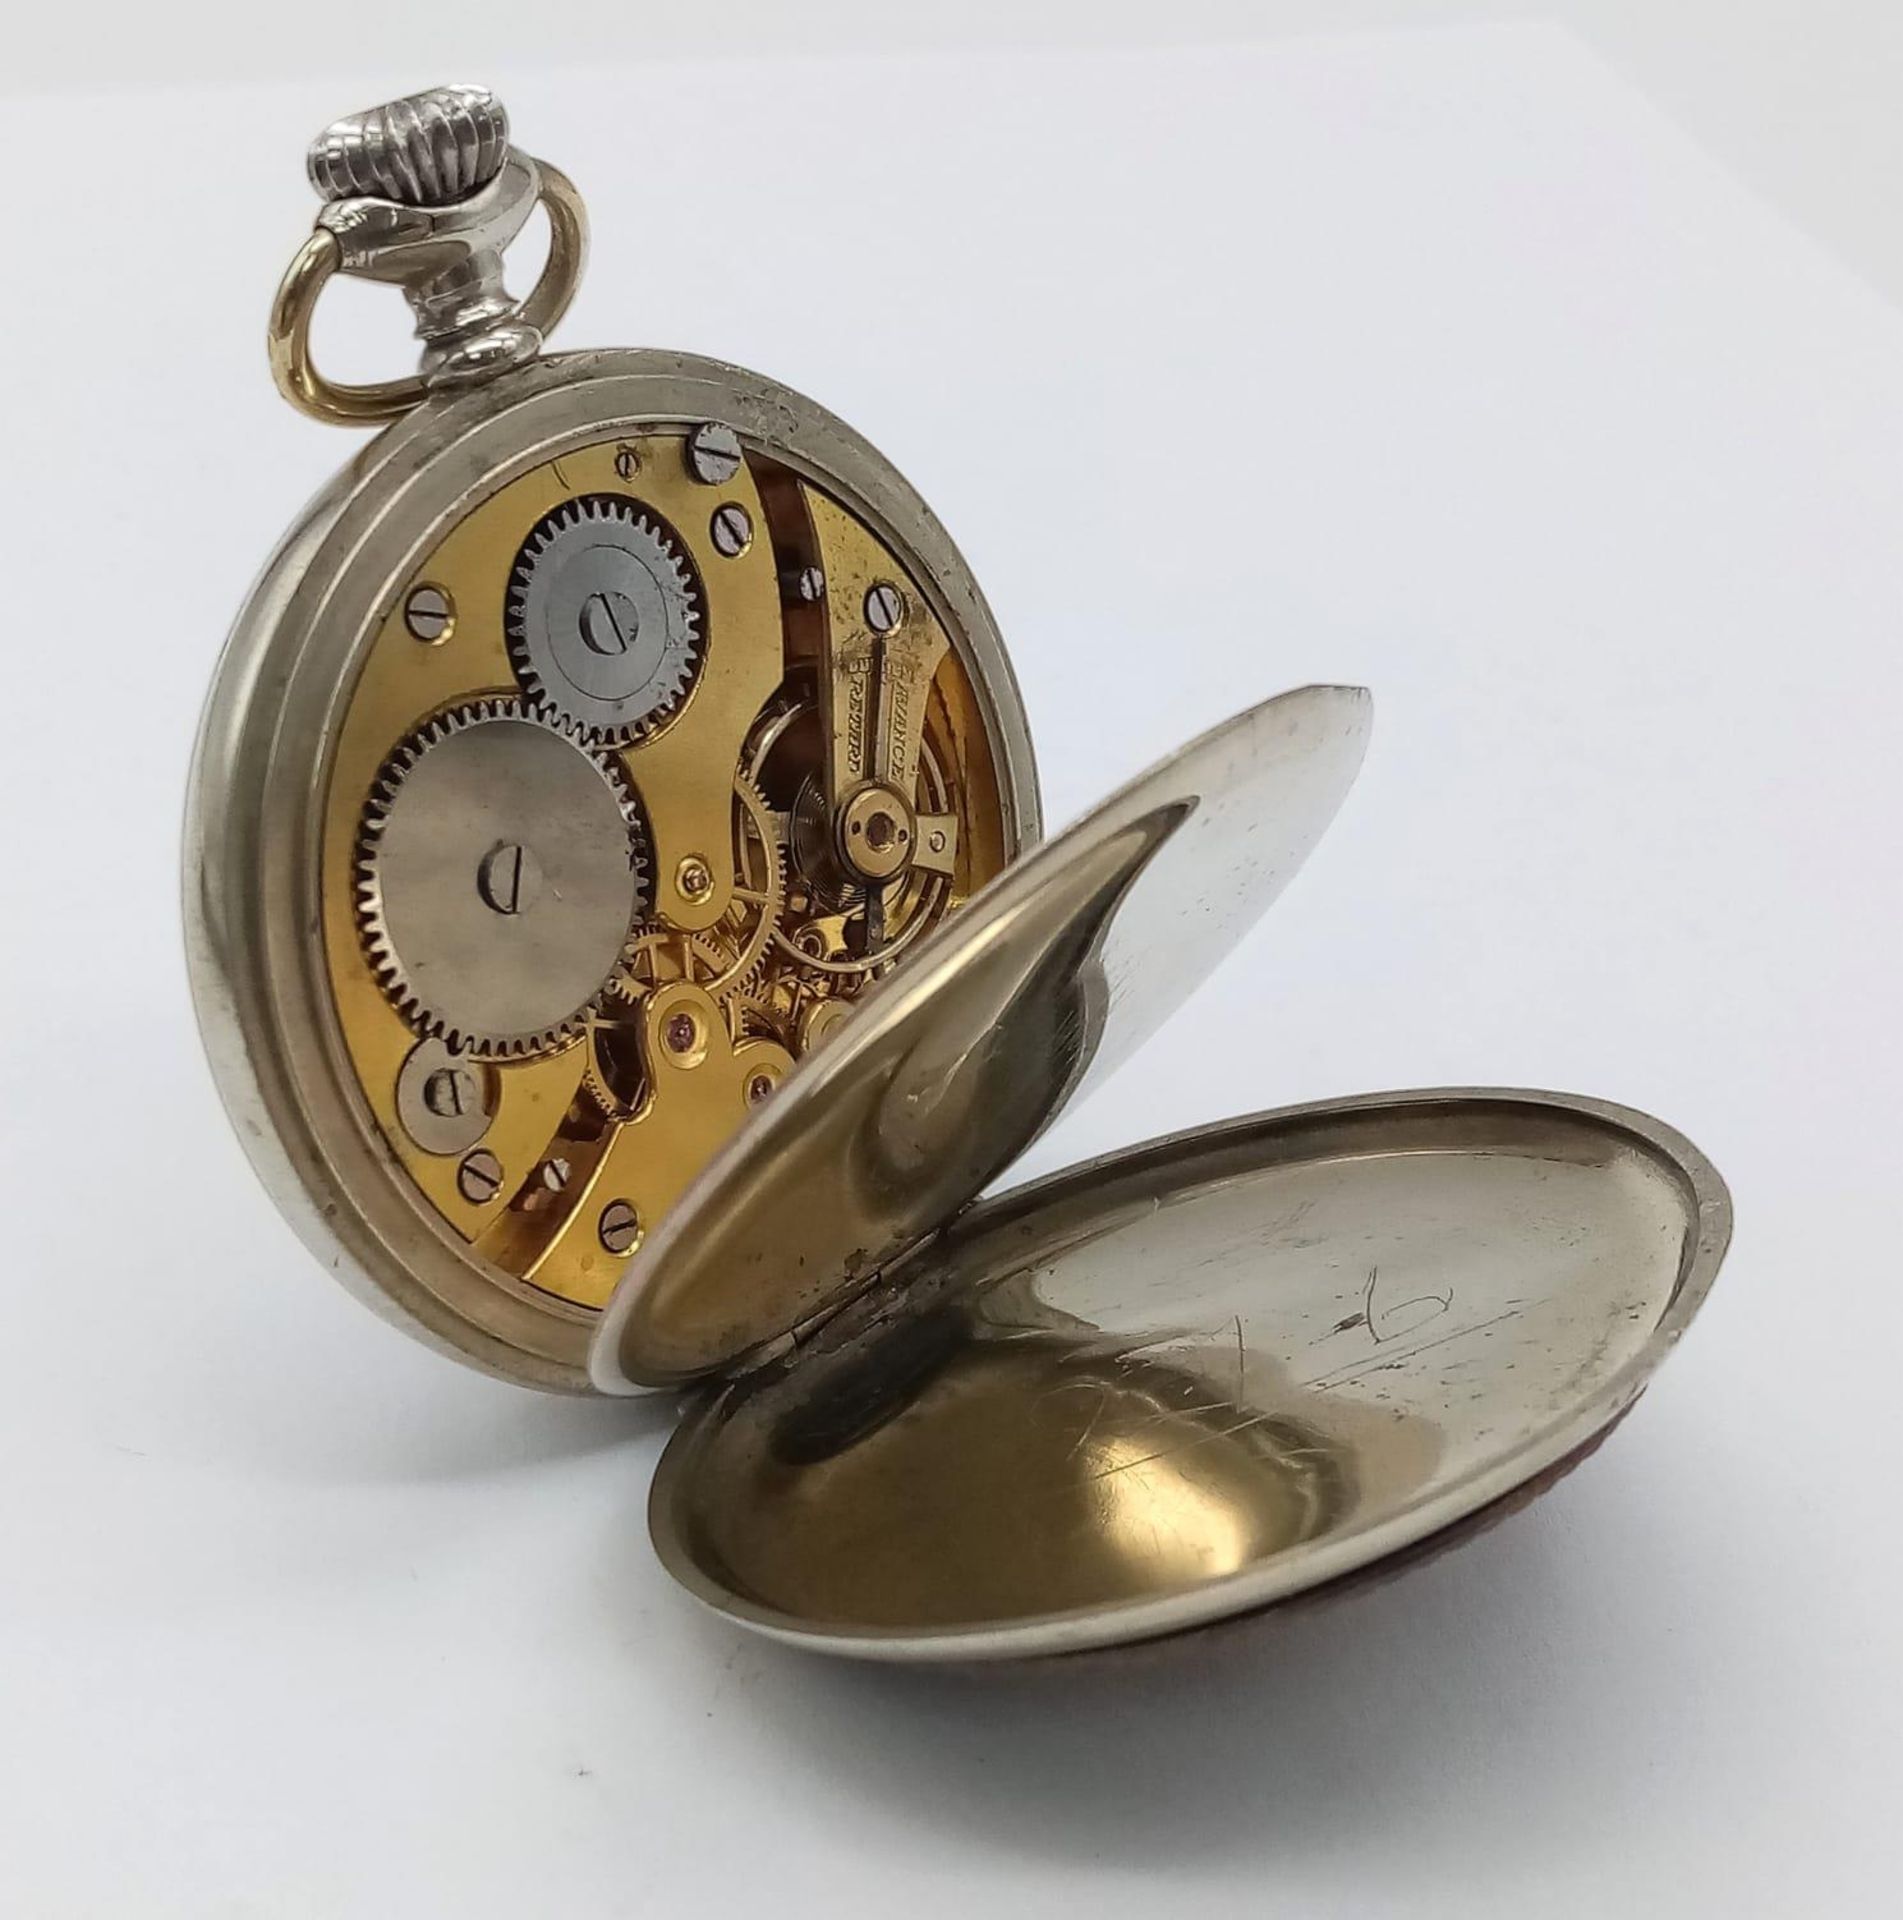 3rd Reich “Brown Shirts” Pocket Watch. 1930’s Swiss Made Pocket Watch with the buckle centre from - Image 3 of 6